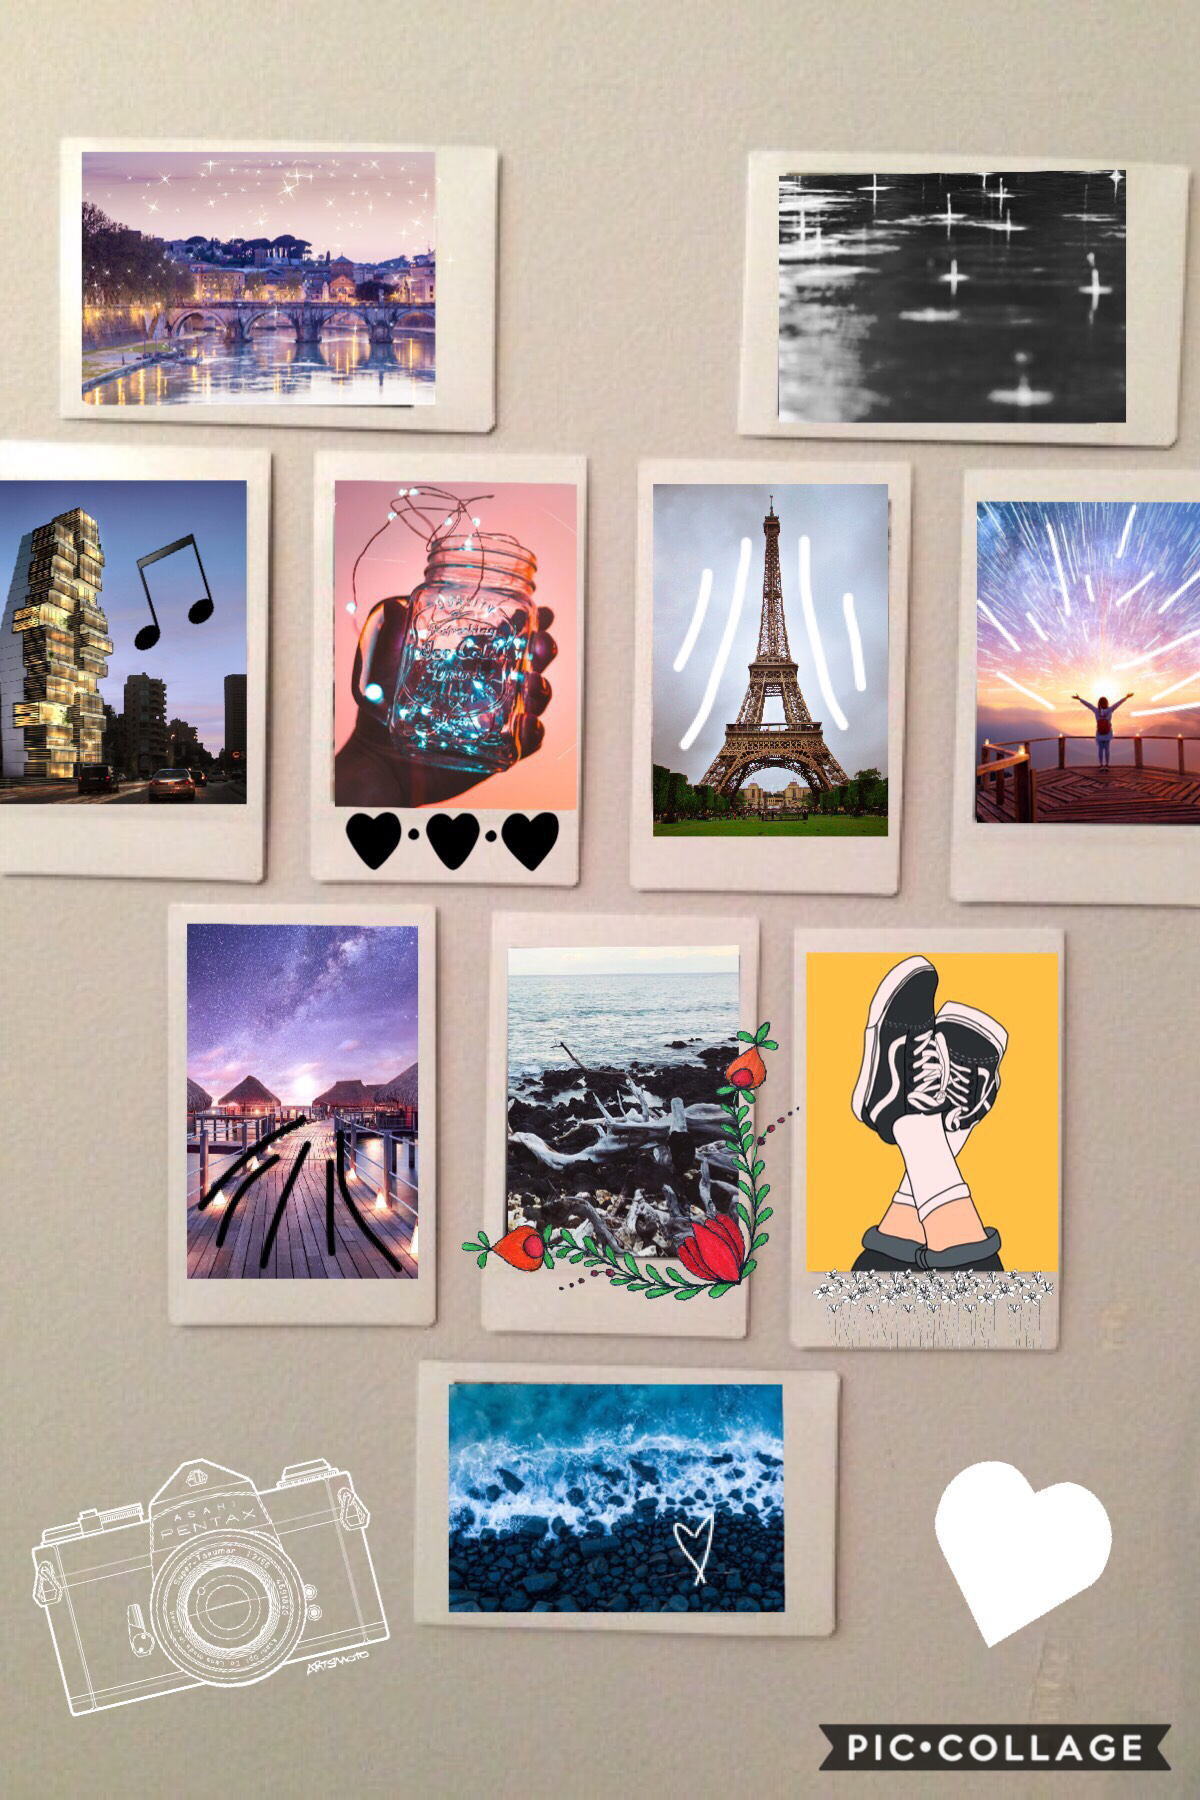 TAP
I think this is really cool looking because I found the background picture of polaroids then I just put pictures I liked over it! Then I added some cute little decorations/doodles
12/29/18